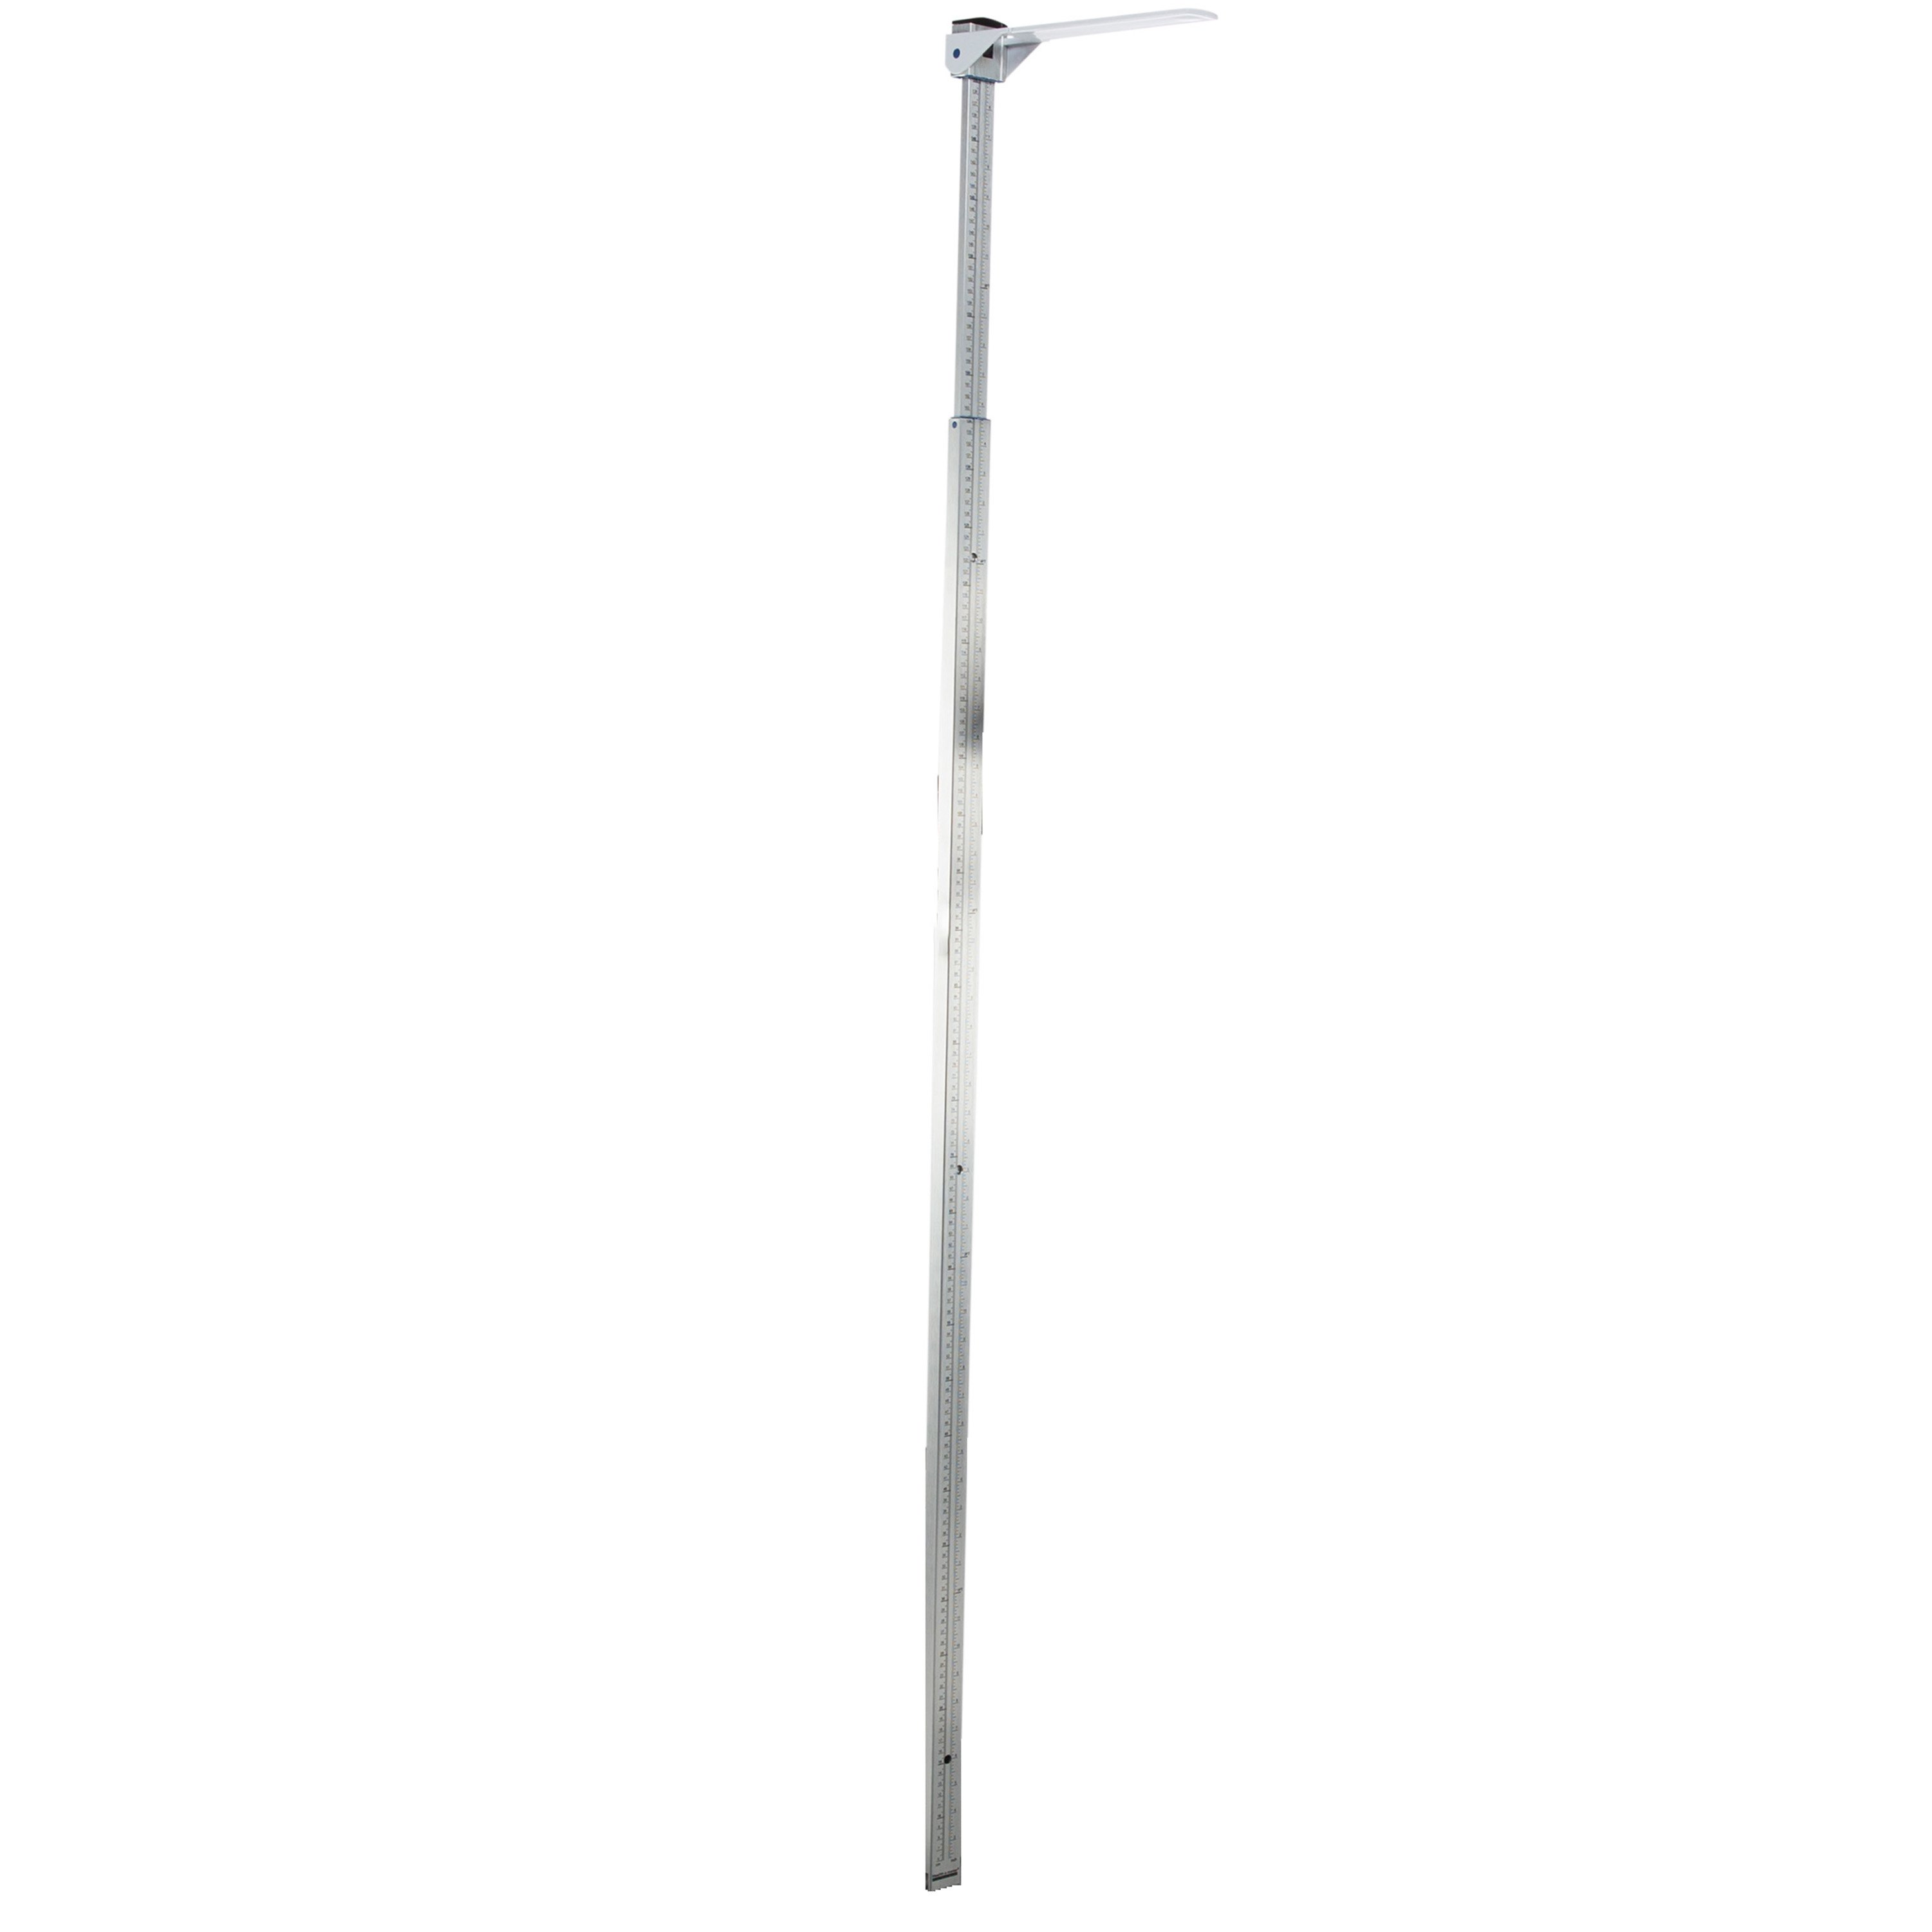 https://www.universalmedicalinc.com/media/catalog/product/cache/30001a70cc972b6c5336337d1270ded8/s/t/strod_mechanical-height-rod-for-2101-series-scale_height-rod-only.jpg